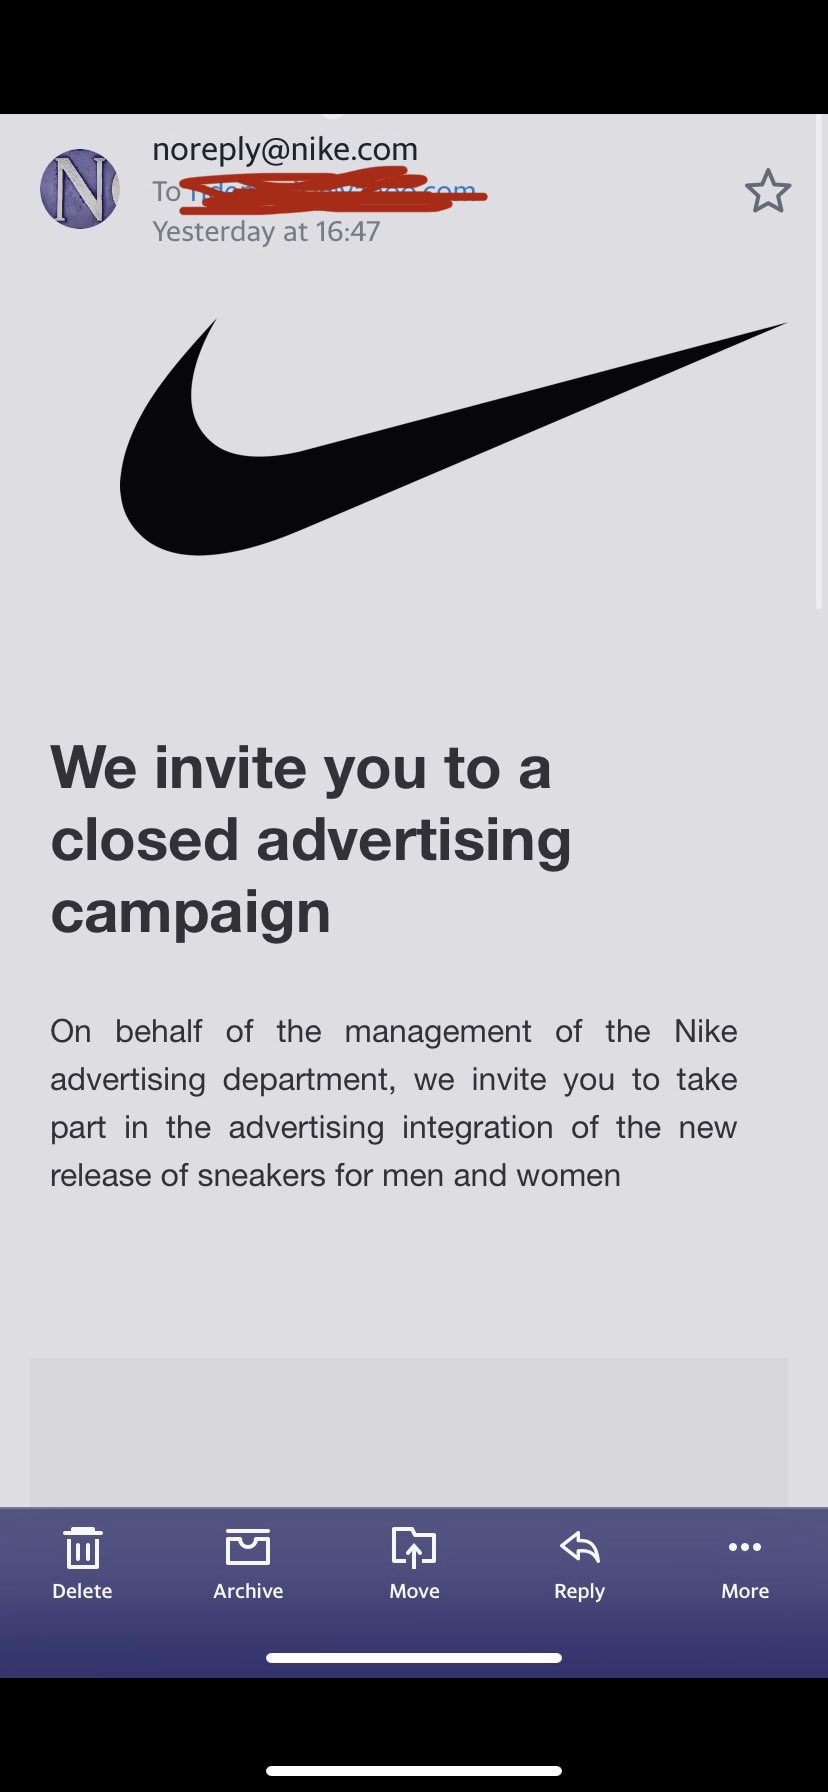 Nike on Twitter: "@Sonuy450 We can confirm that this email was not generated our team. Please remove original email, and do not opening any links within message. Our